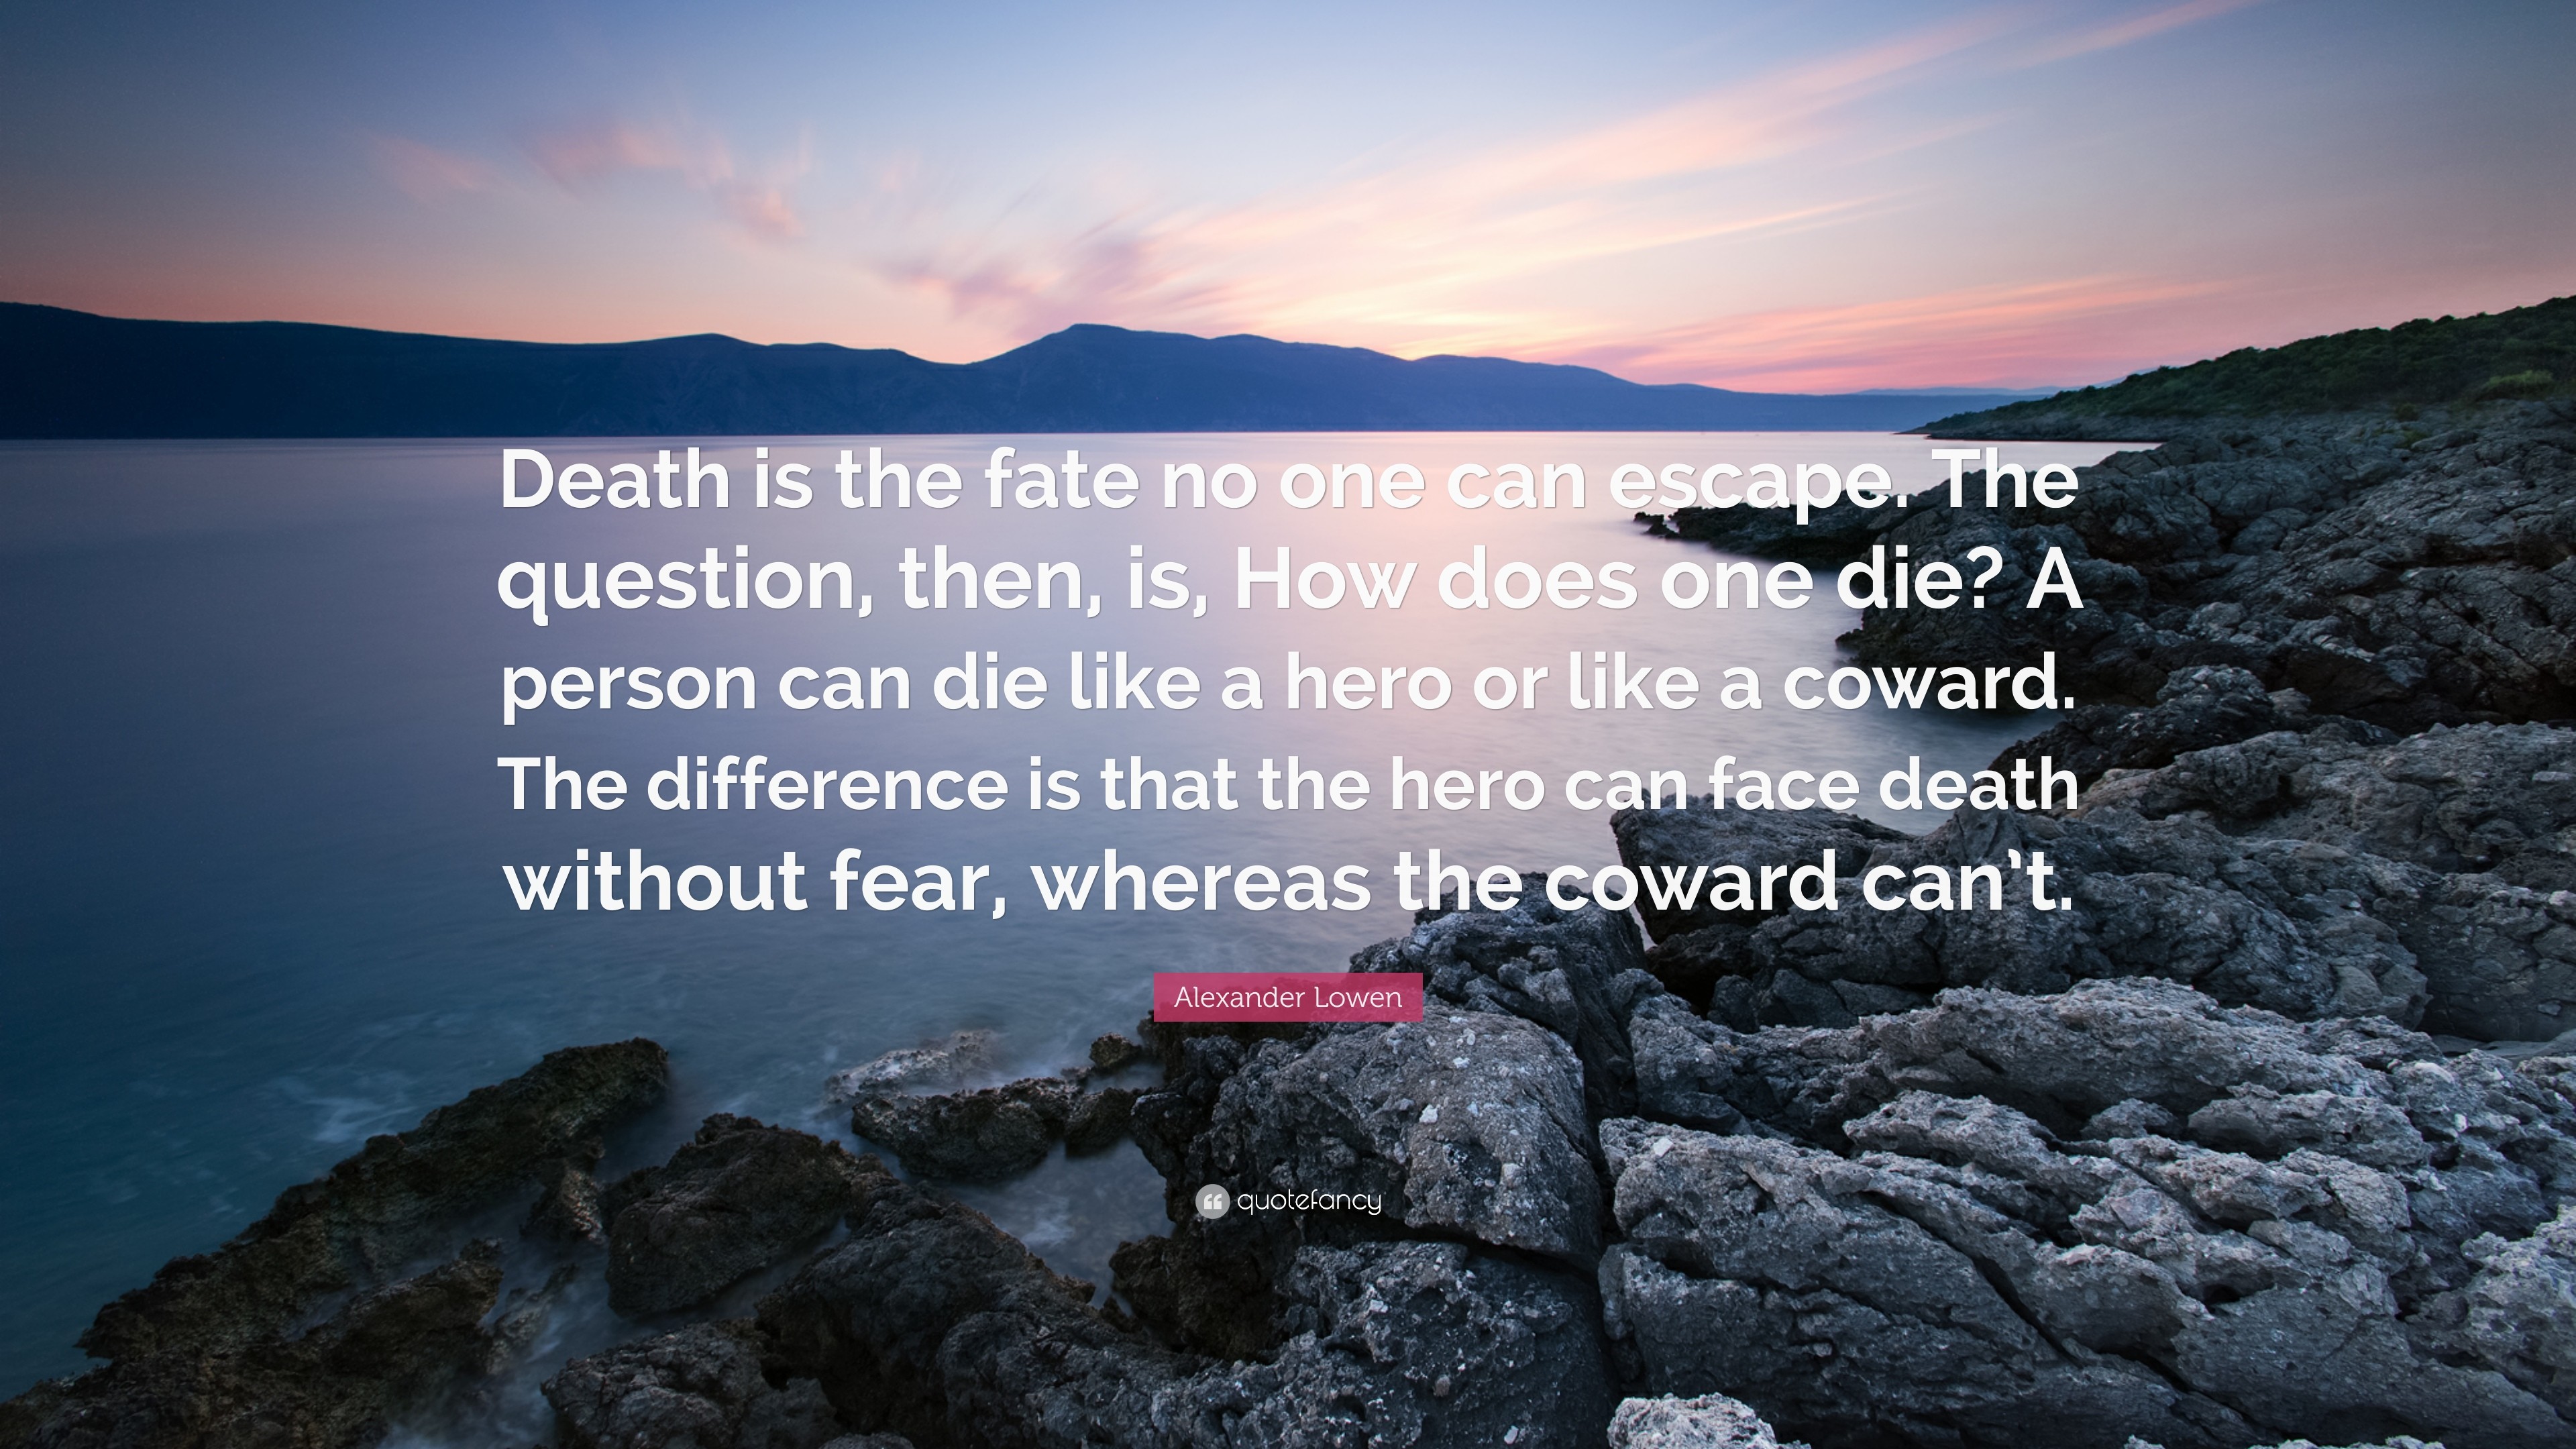 3840x2160 Alexander Lowen Quote: “Death is the fate no one can escape. The question